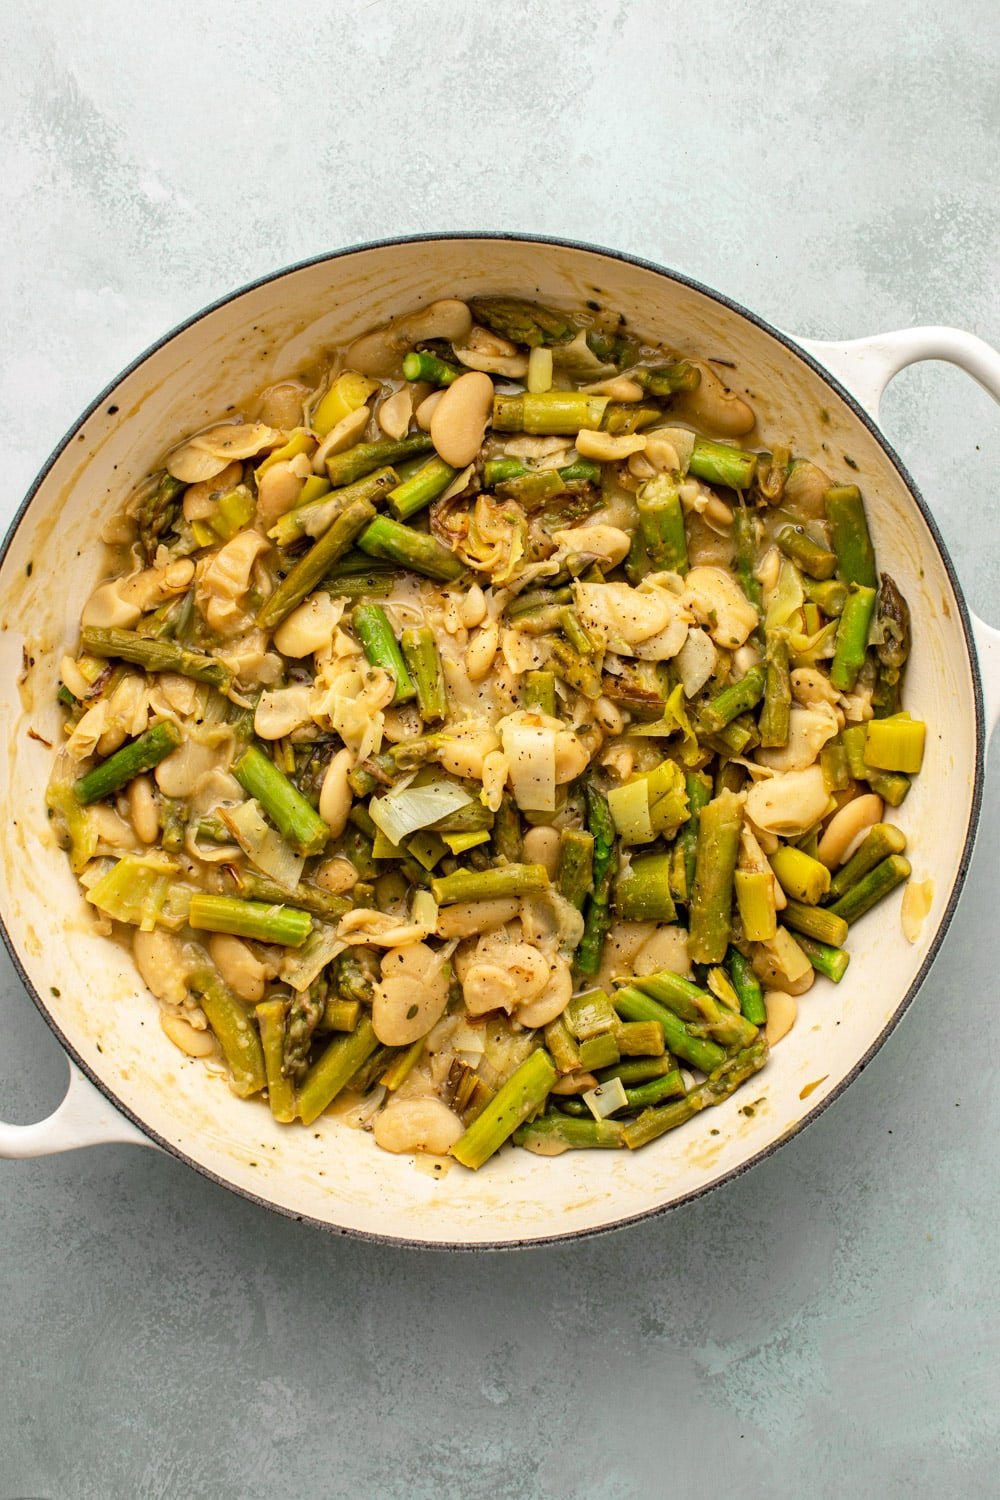 a photo of the pan with the cooked braised asparagus and butter beans placed on a light green kitchen countertop